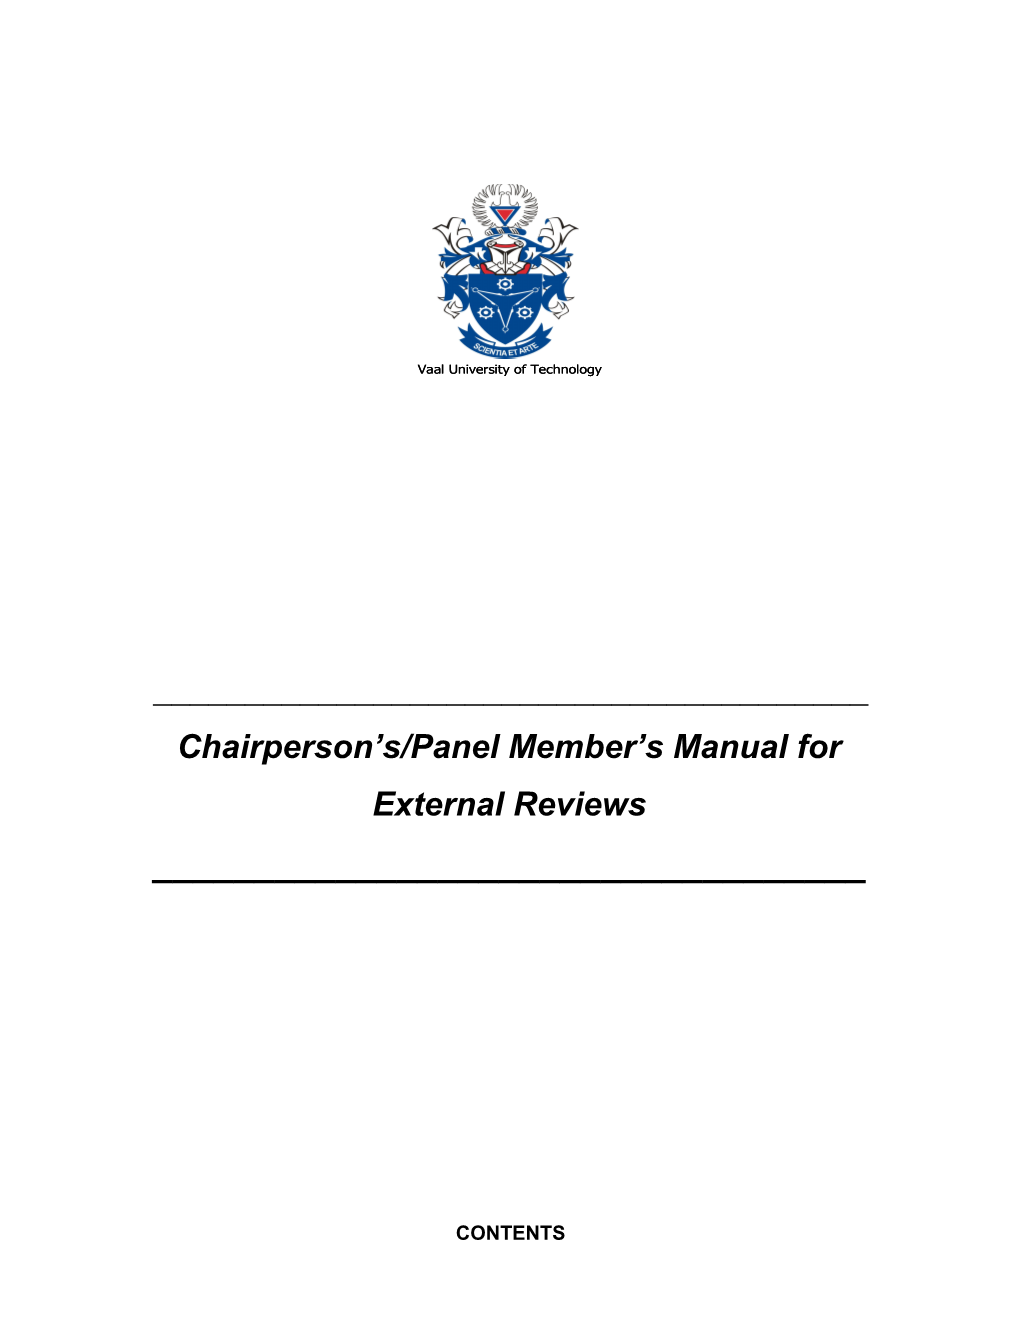 Chairperson S/Panel Member S Manual for External Reviews